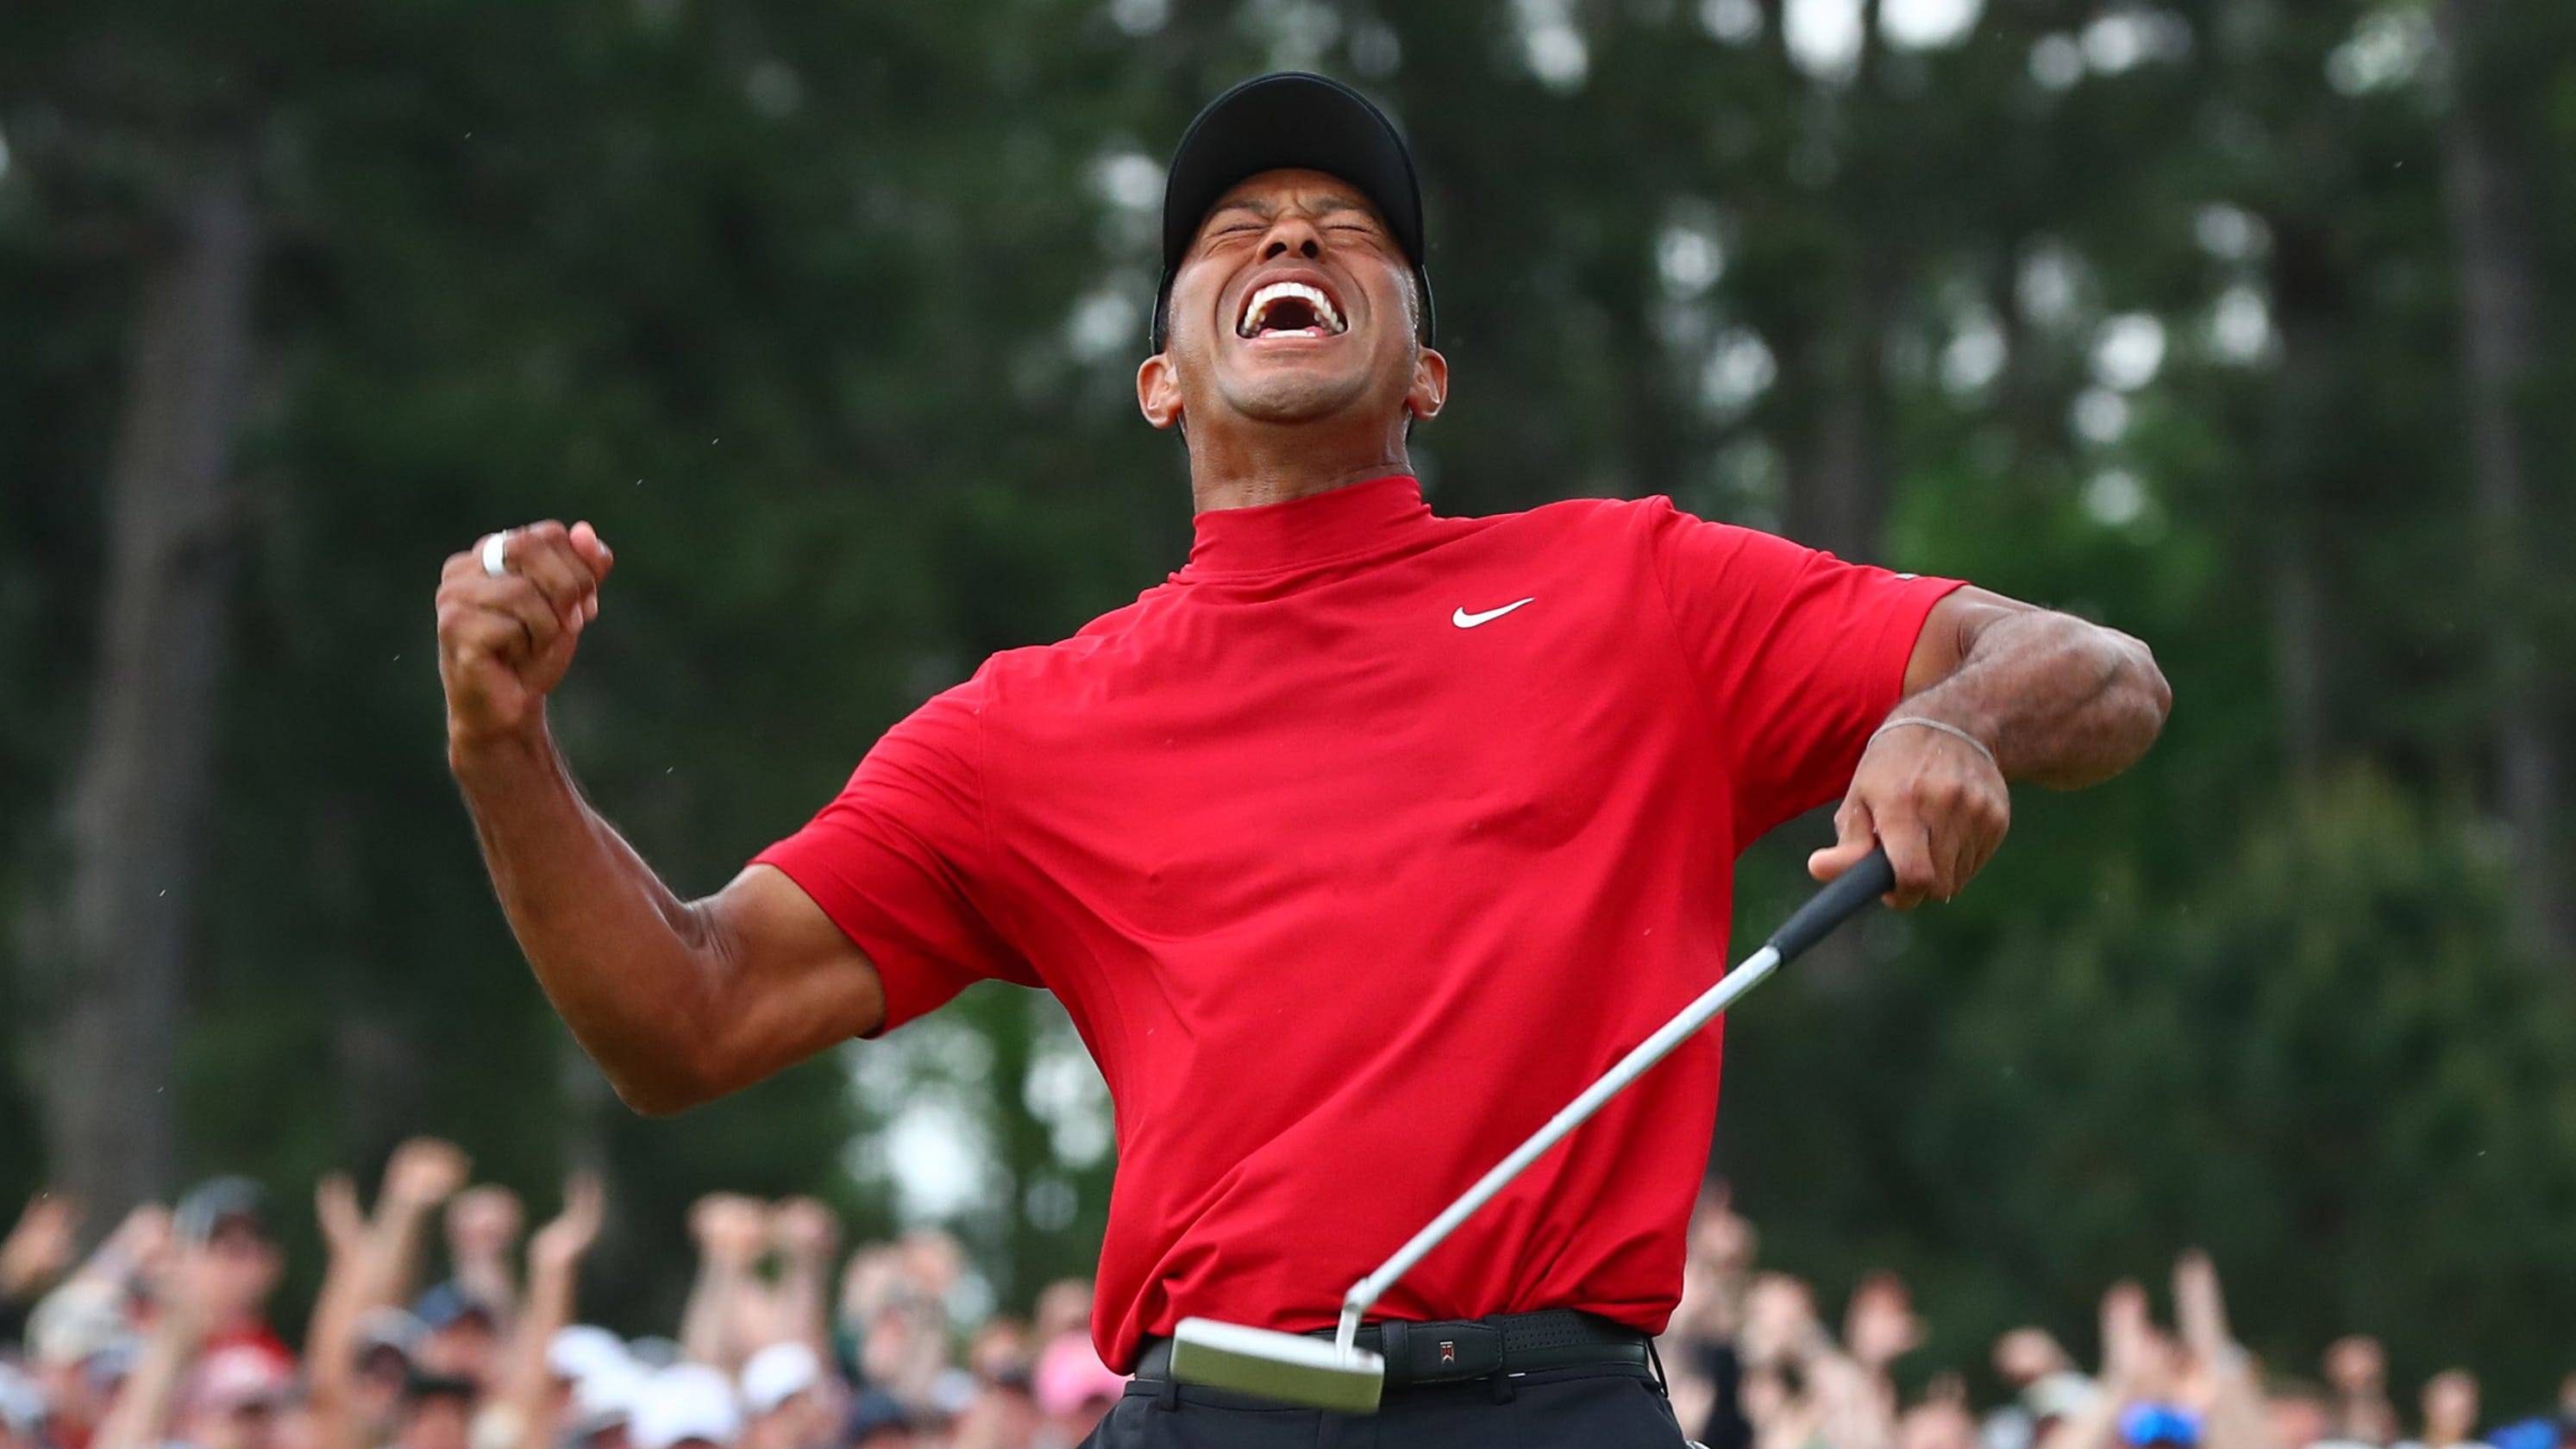 Tiger Woods' Masters victory: Story behind iconic photos at Augusta